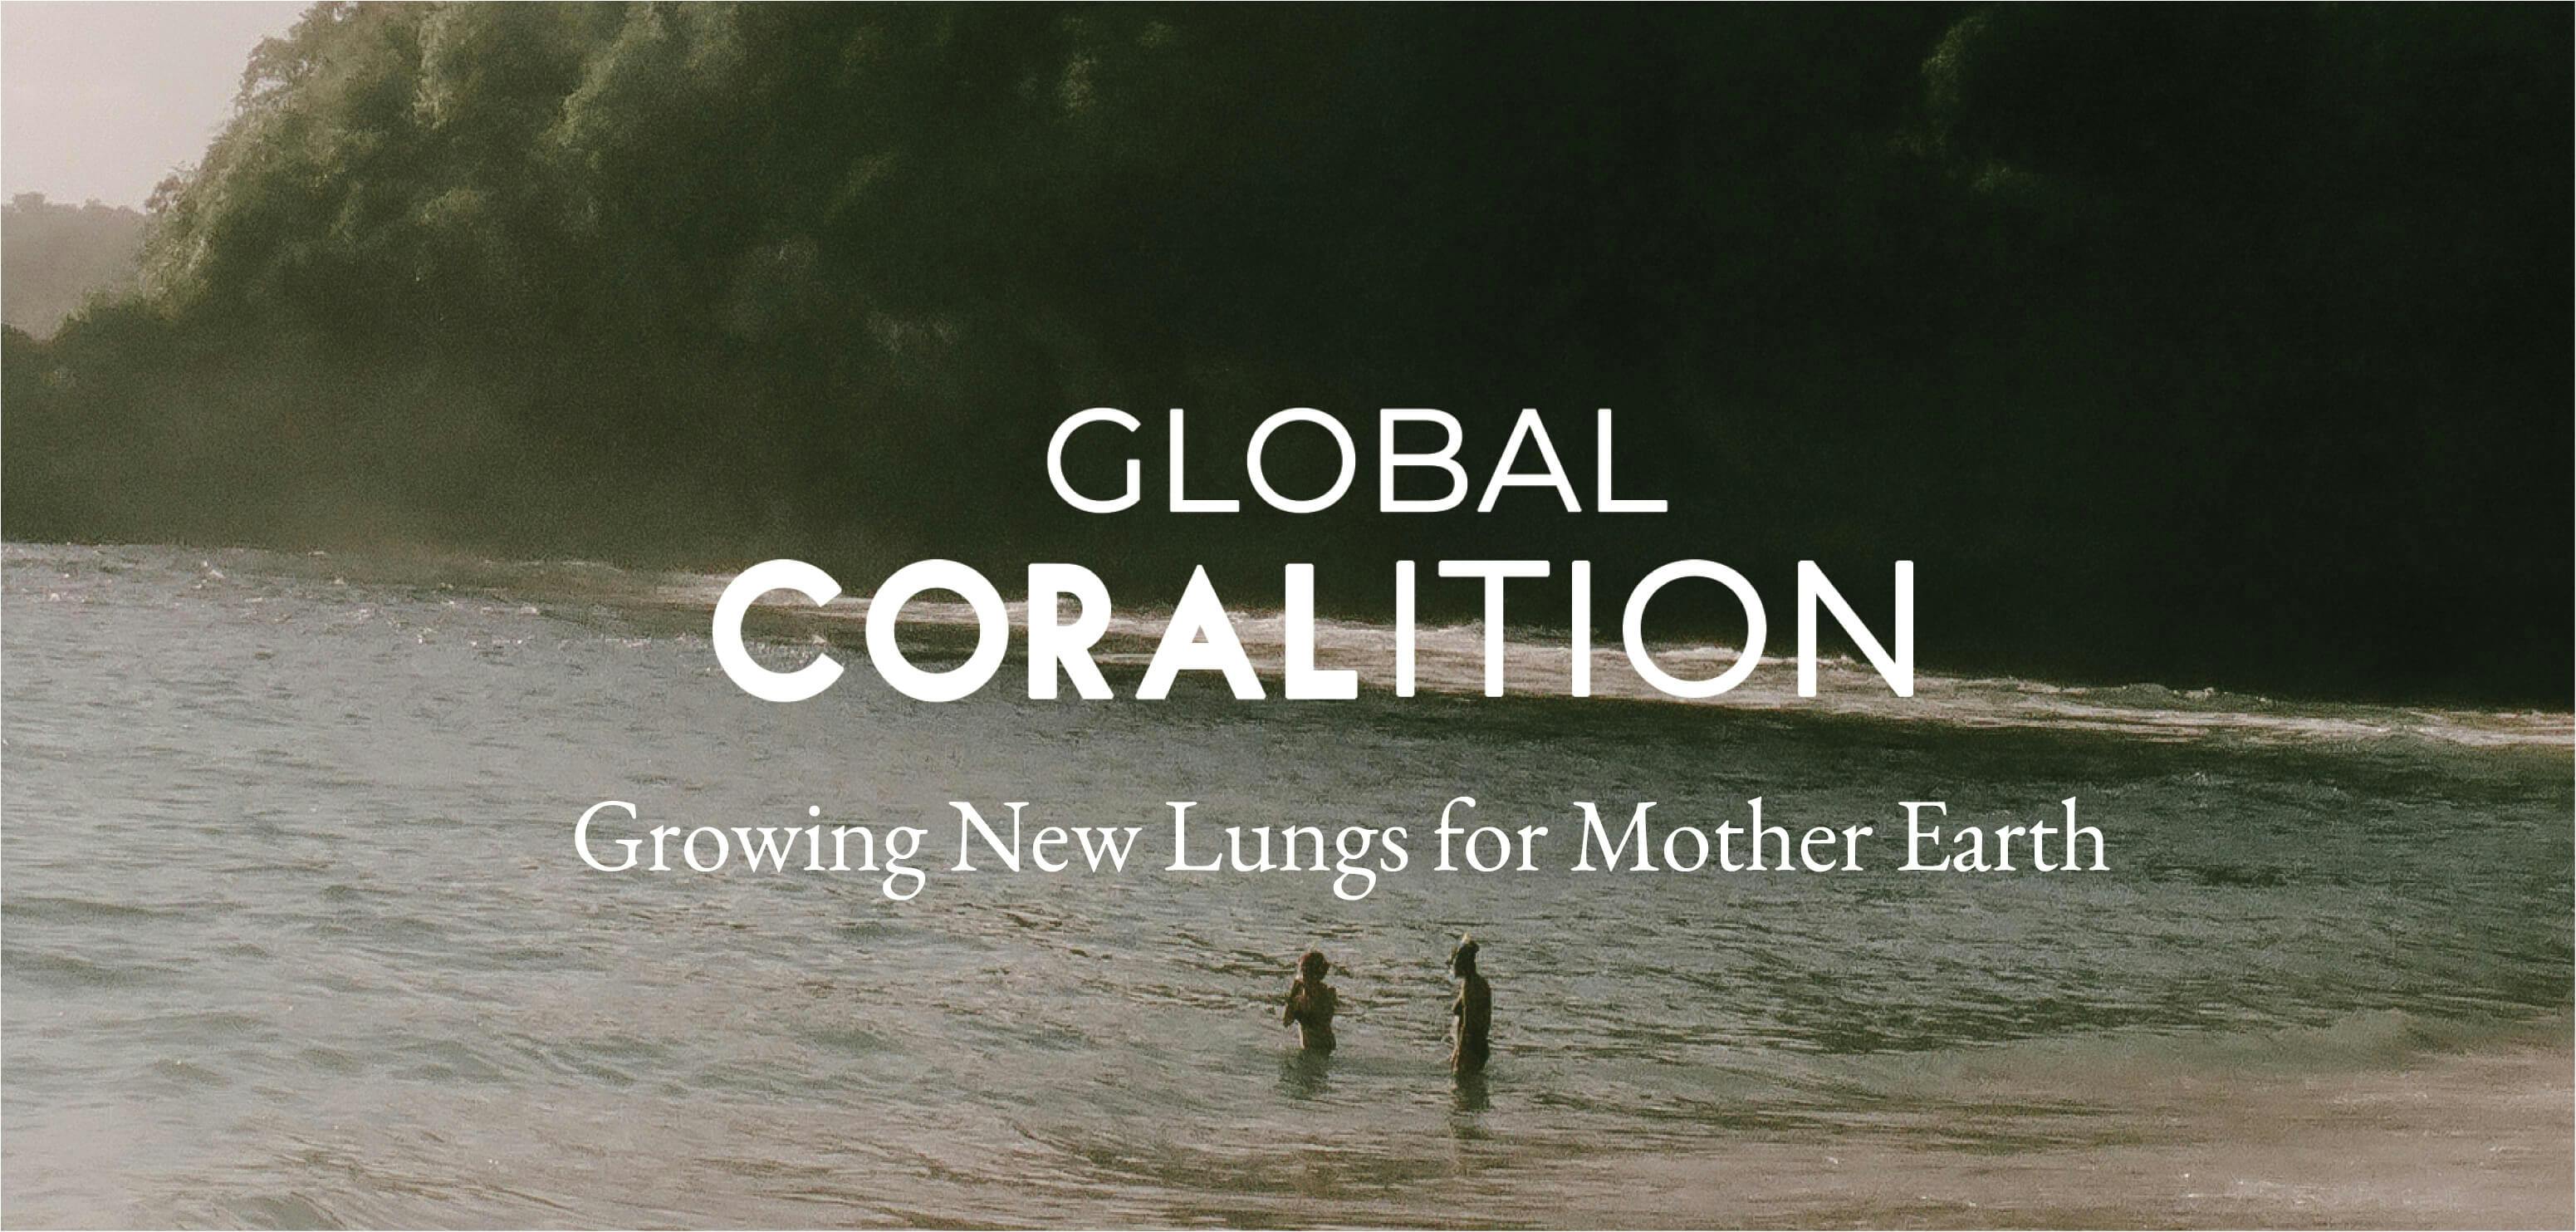 Giving Back Through our Auction in Collaboration with Global Coralition